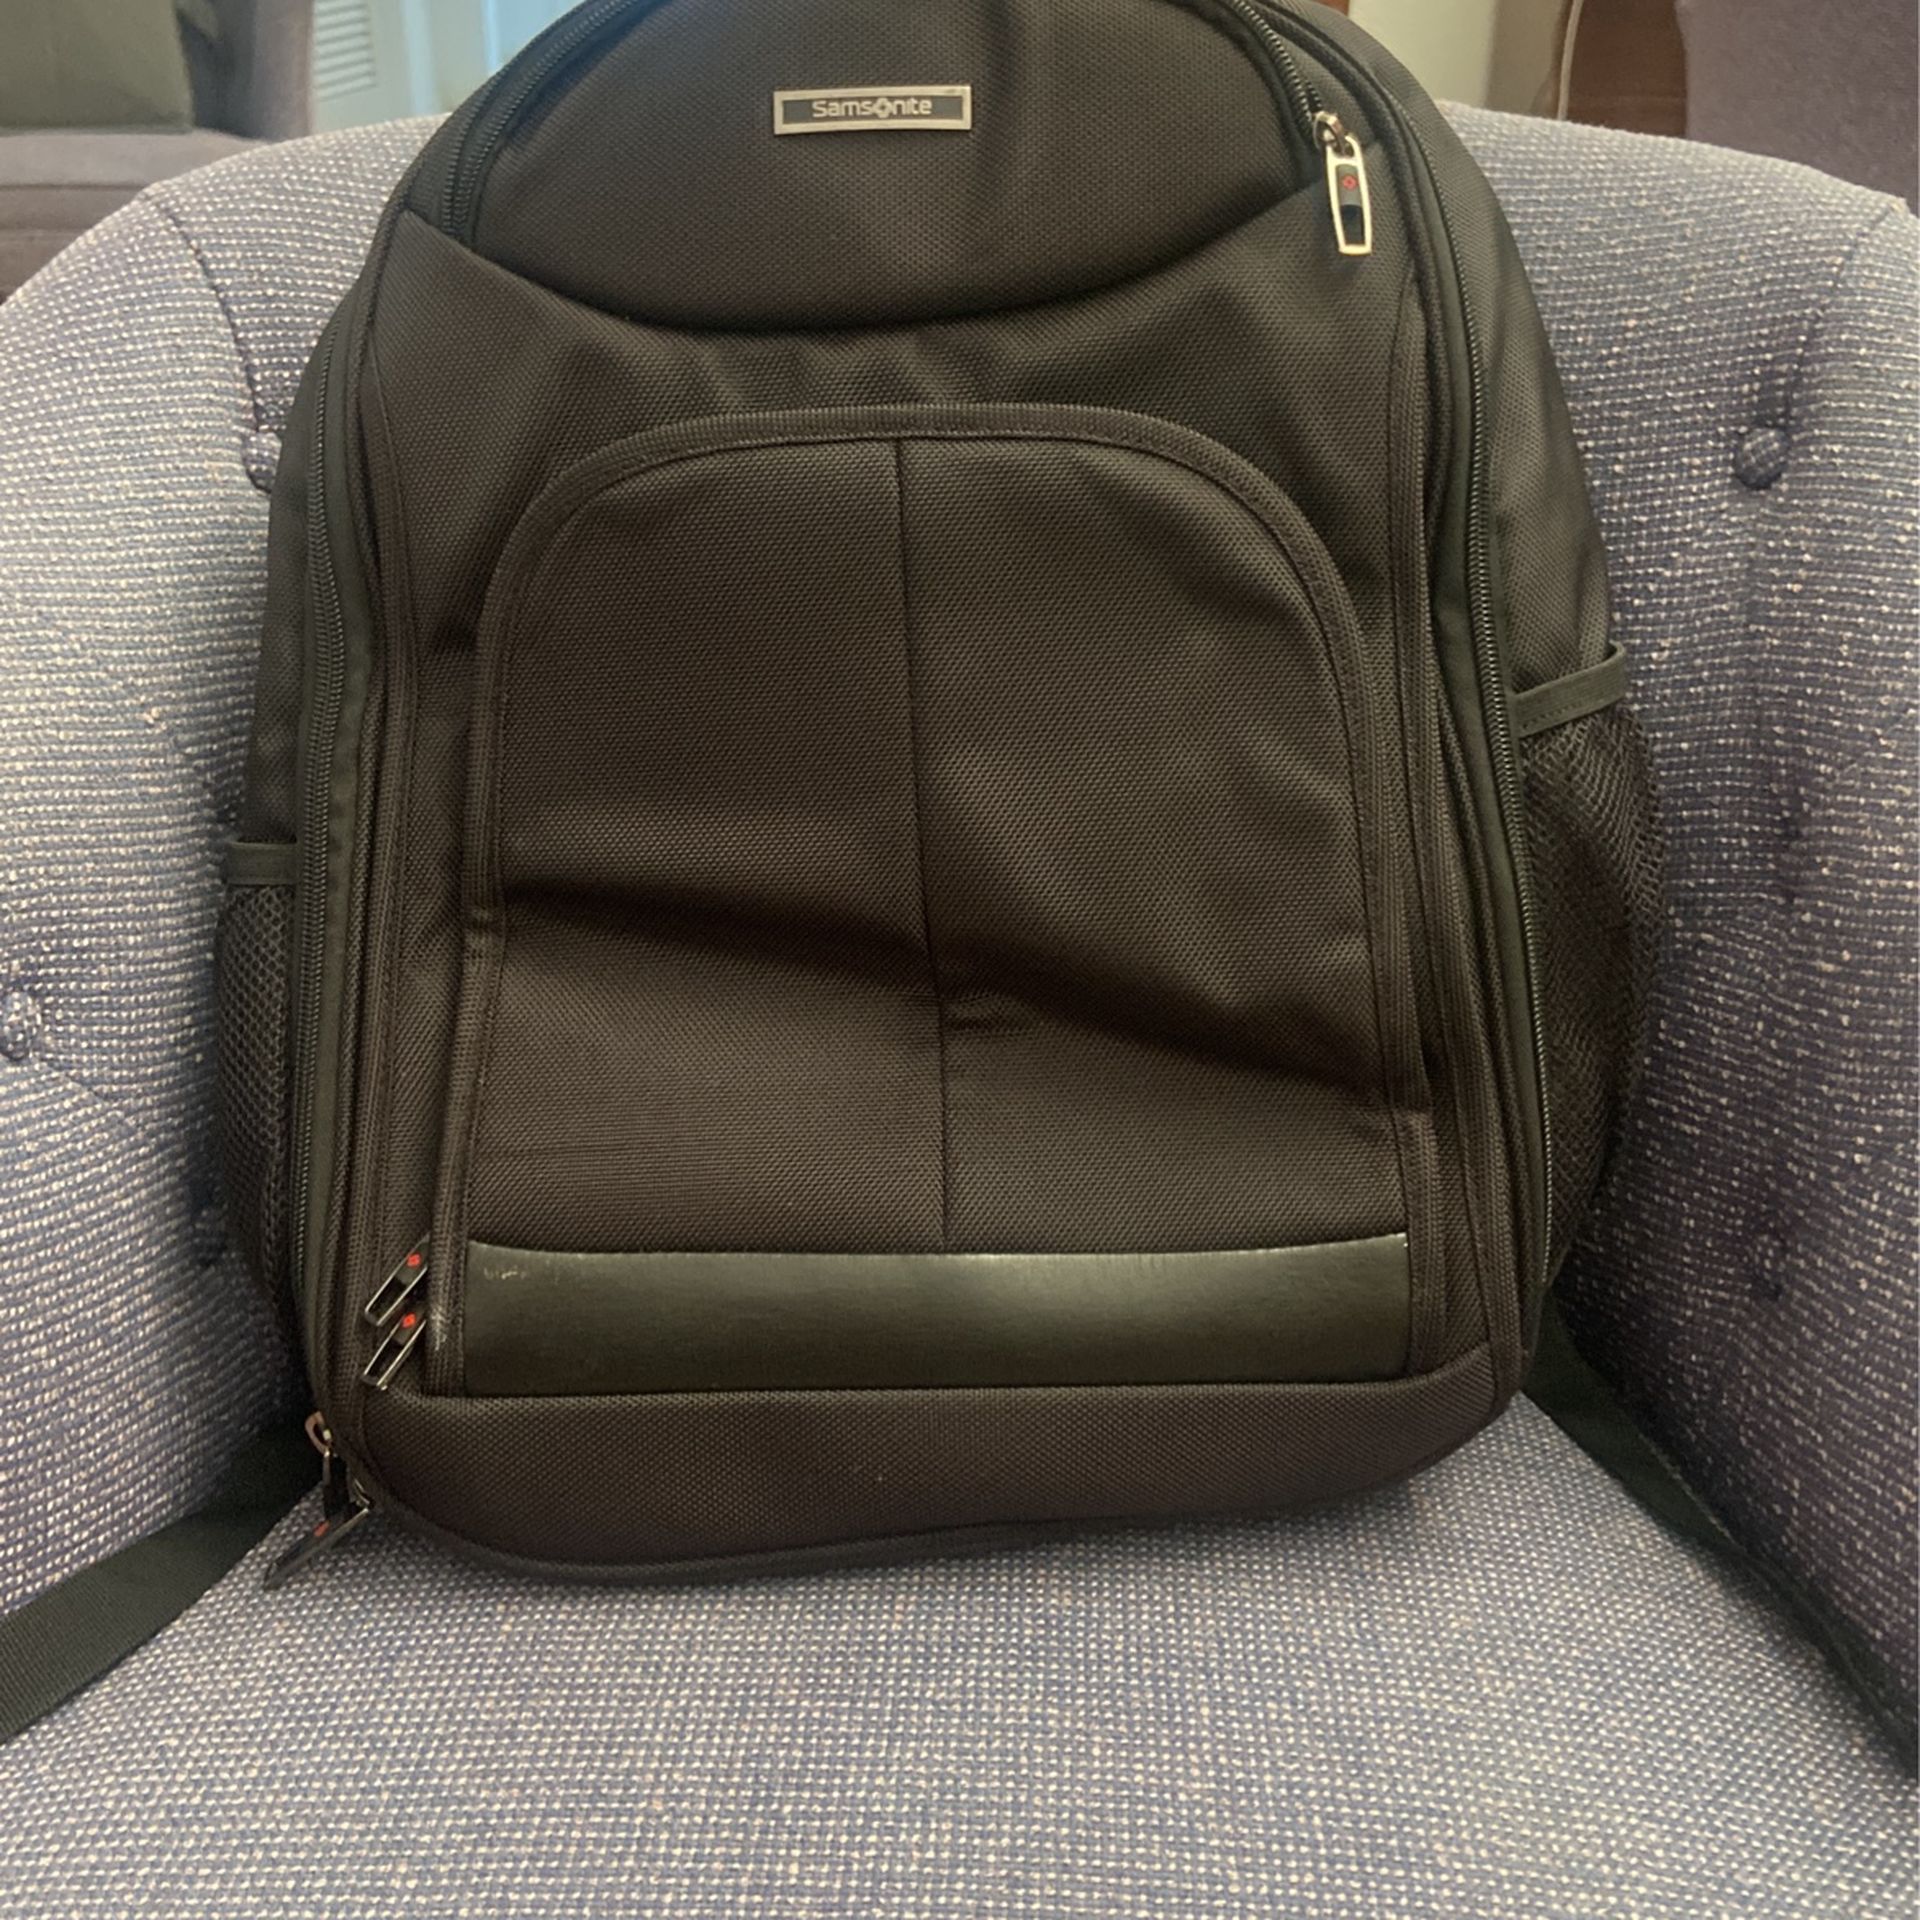 Samsonite Backpack Black Carry On Travel (contact info removed) 1125663